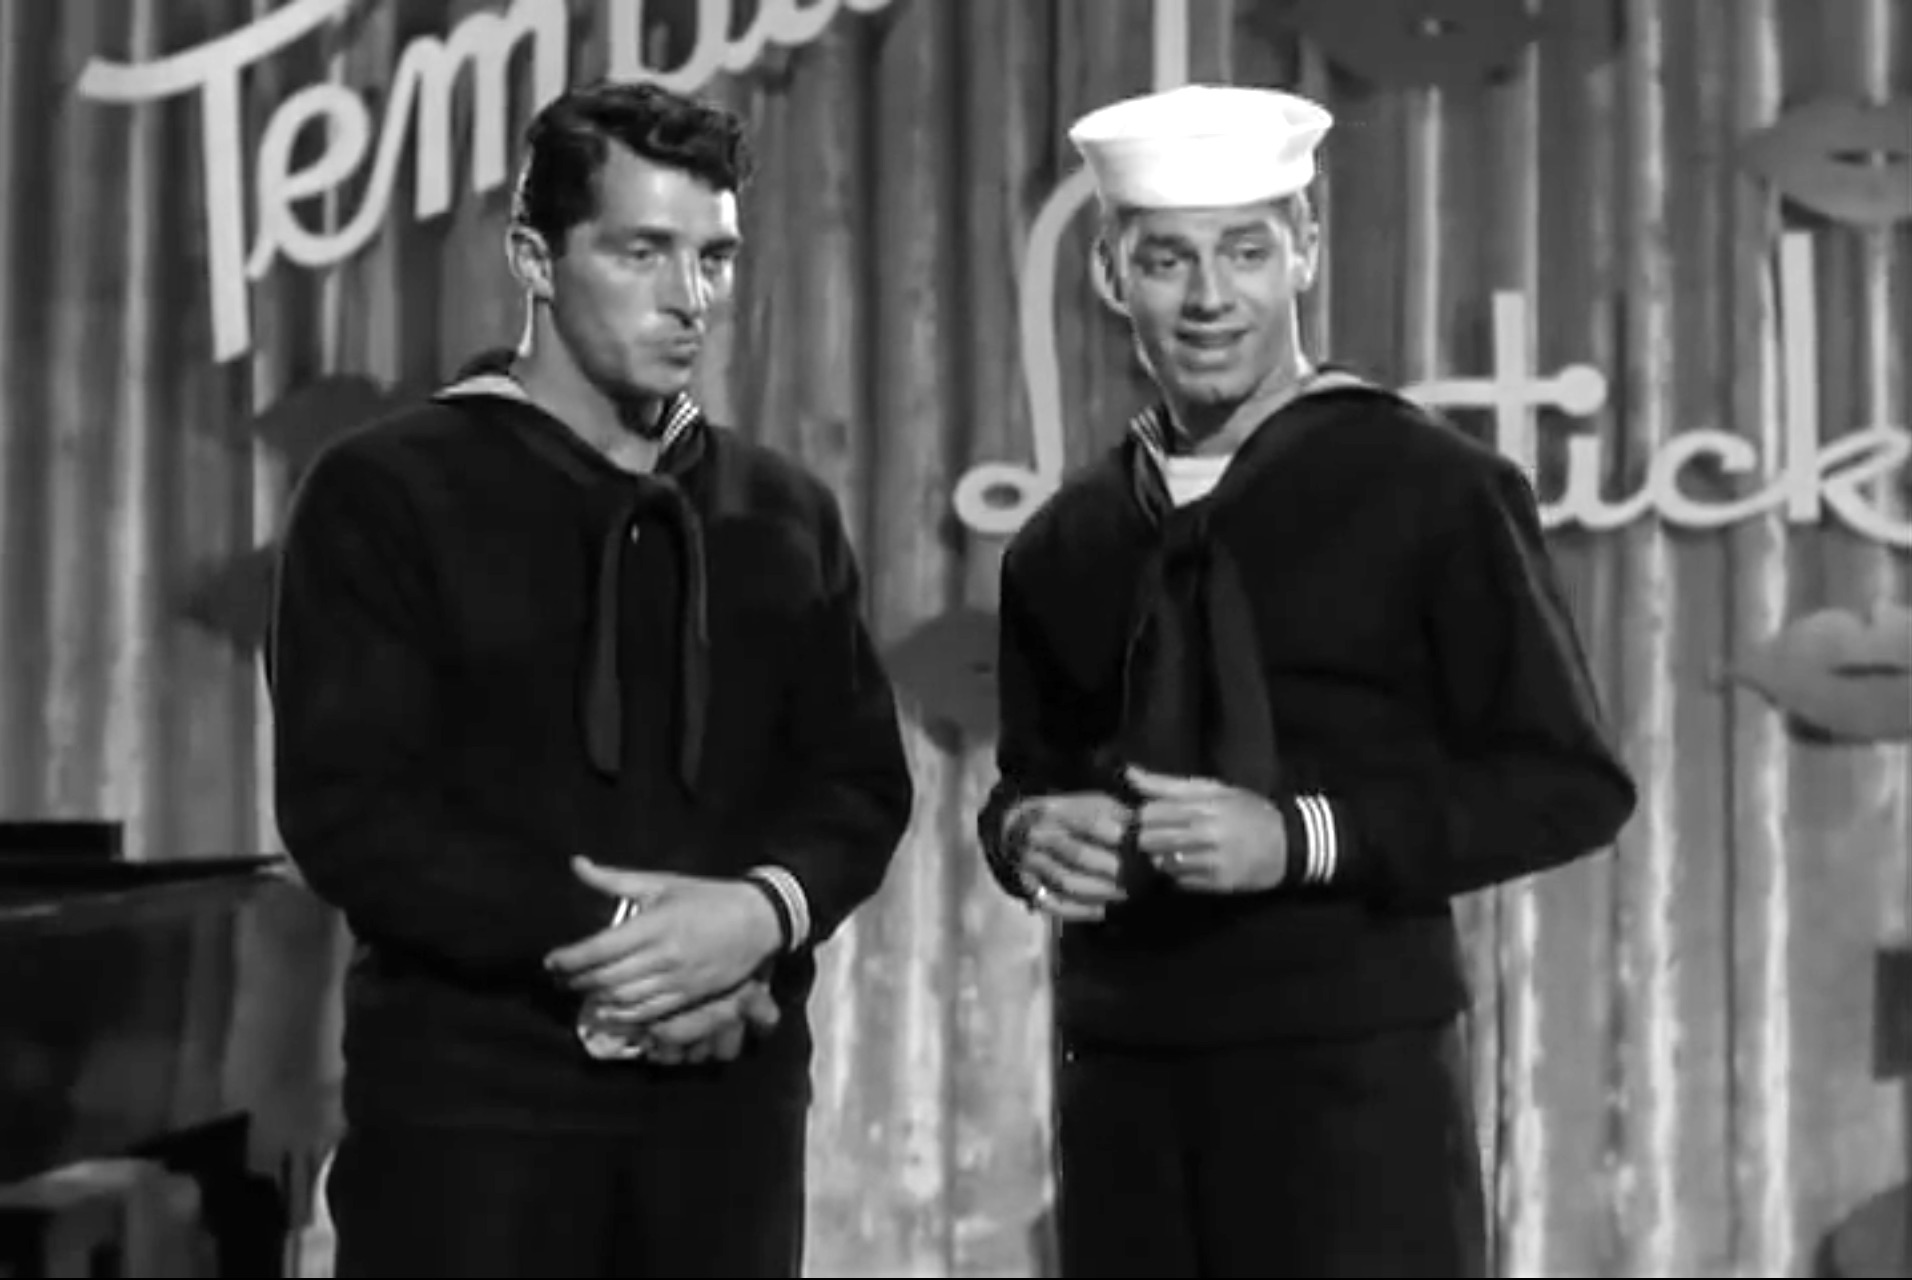 Song lyrics to Today Tomorrow Forever, Lyrics by Mack David, Music by Jerry Livingston, performed by Dean Martin, Jerry Lewis, and cast in Sailor Beware